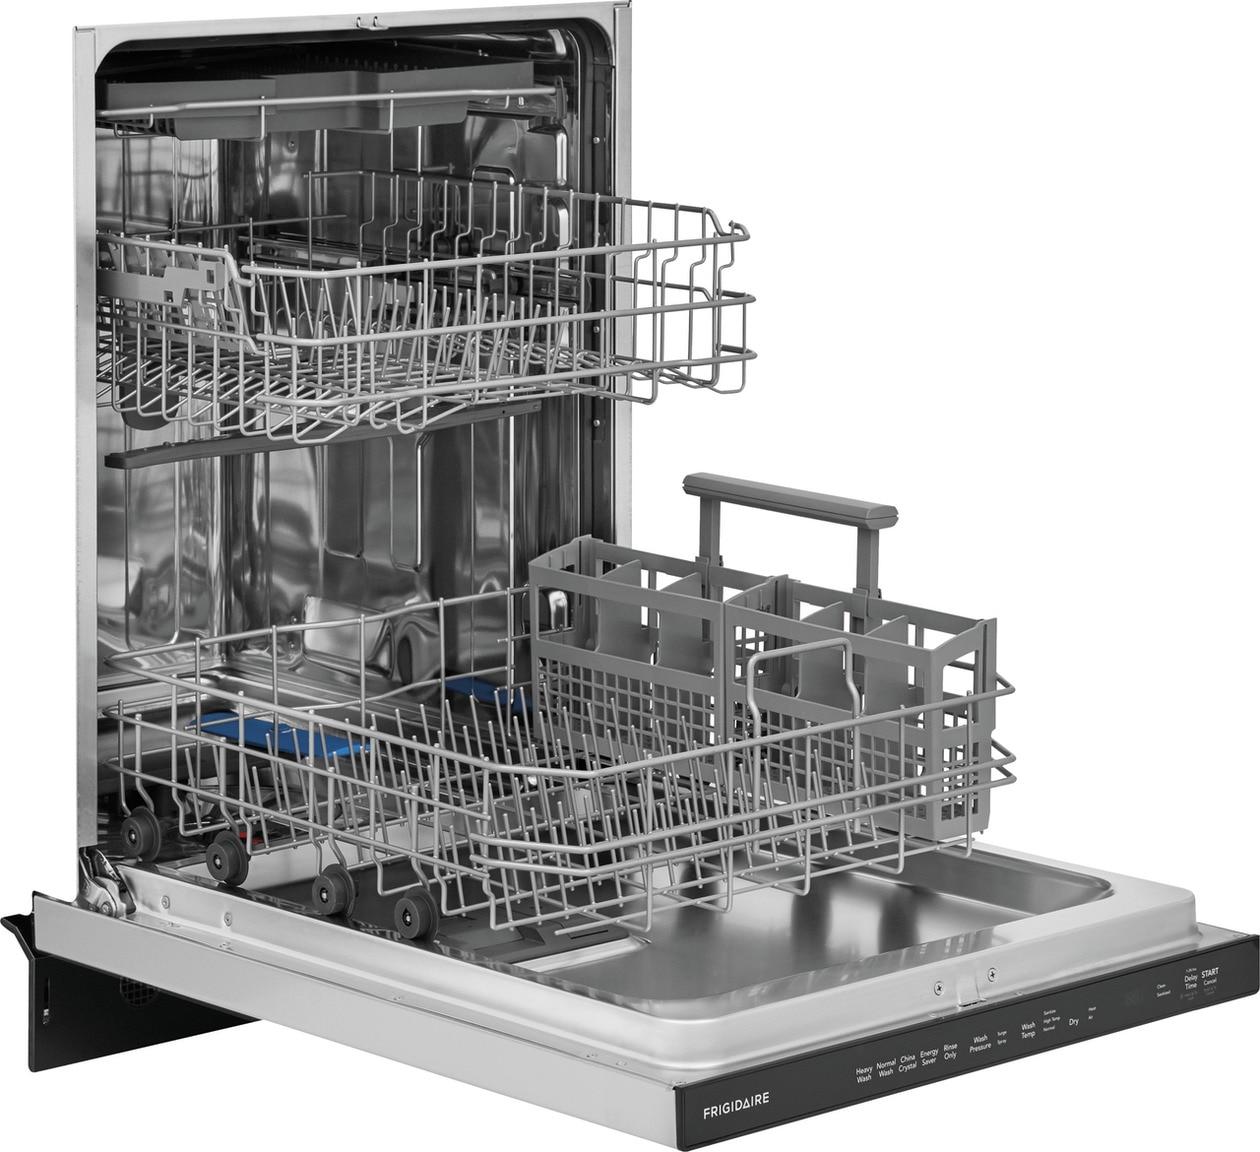 Frigidaire FDSP4501AS Frigidaire 24" Stainless Steel Tub Built-In Dishwasher